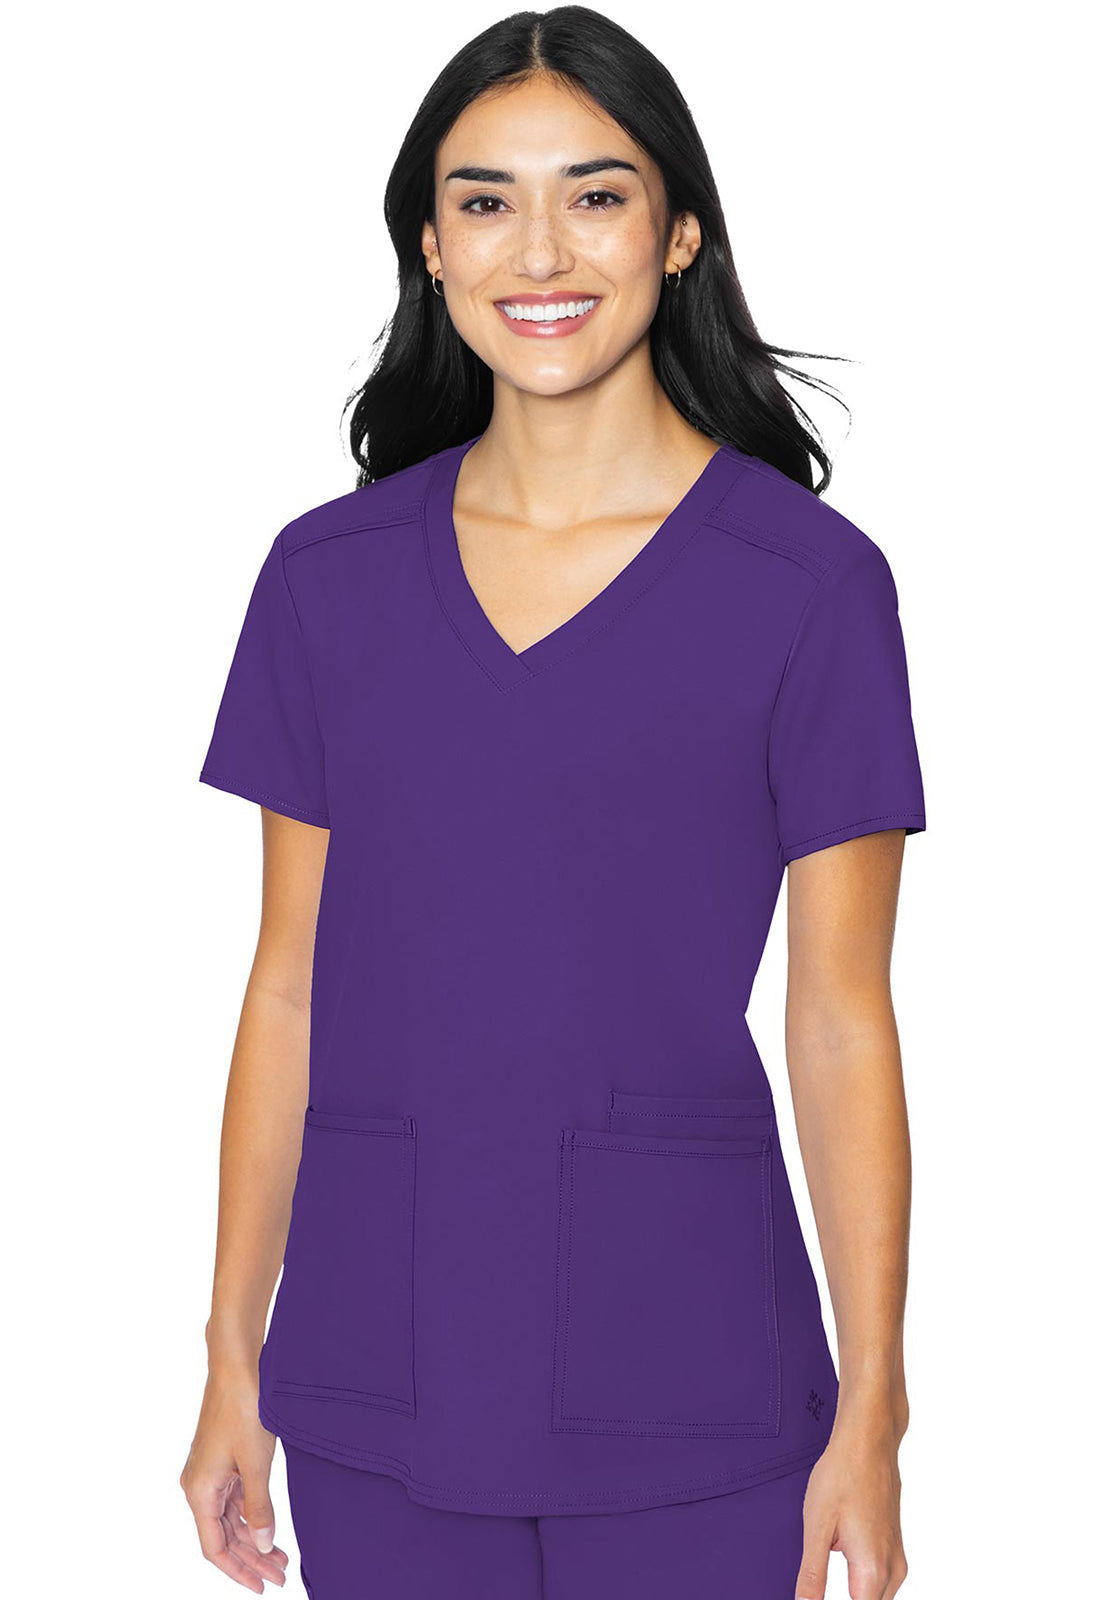 3 Pocket Top by Med Couture (Regular) XS-5XL / Grape